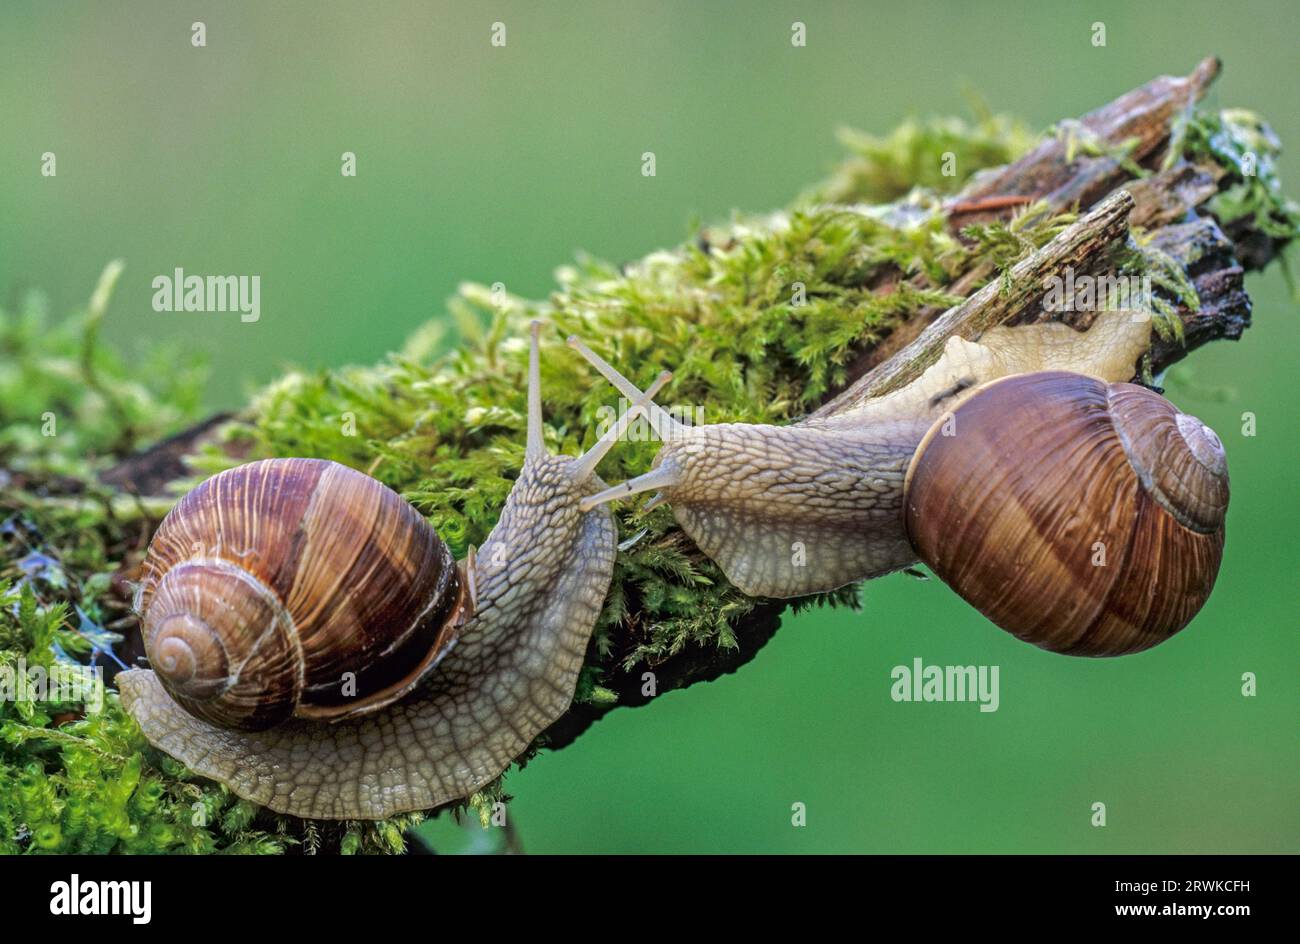 Burgundy snail (Helix pomatia) belongs to the family of land snails (Photo meeting), Burgundy Snail is a large air-breathing land snail (Roman Snail) Stock Photo